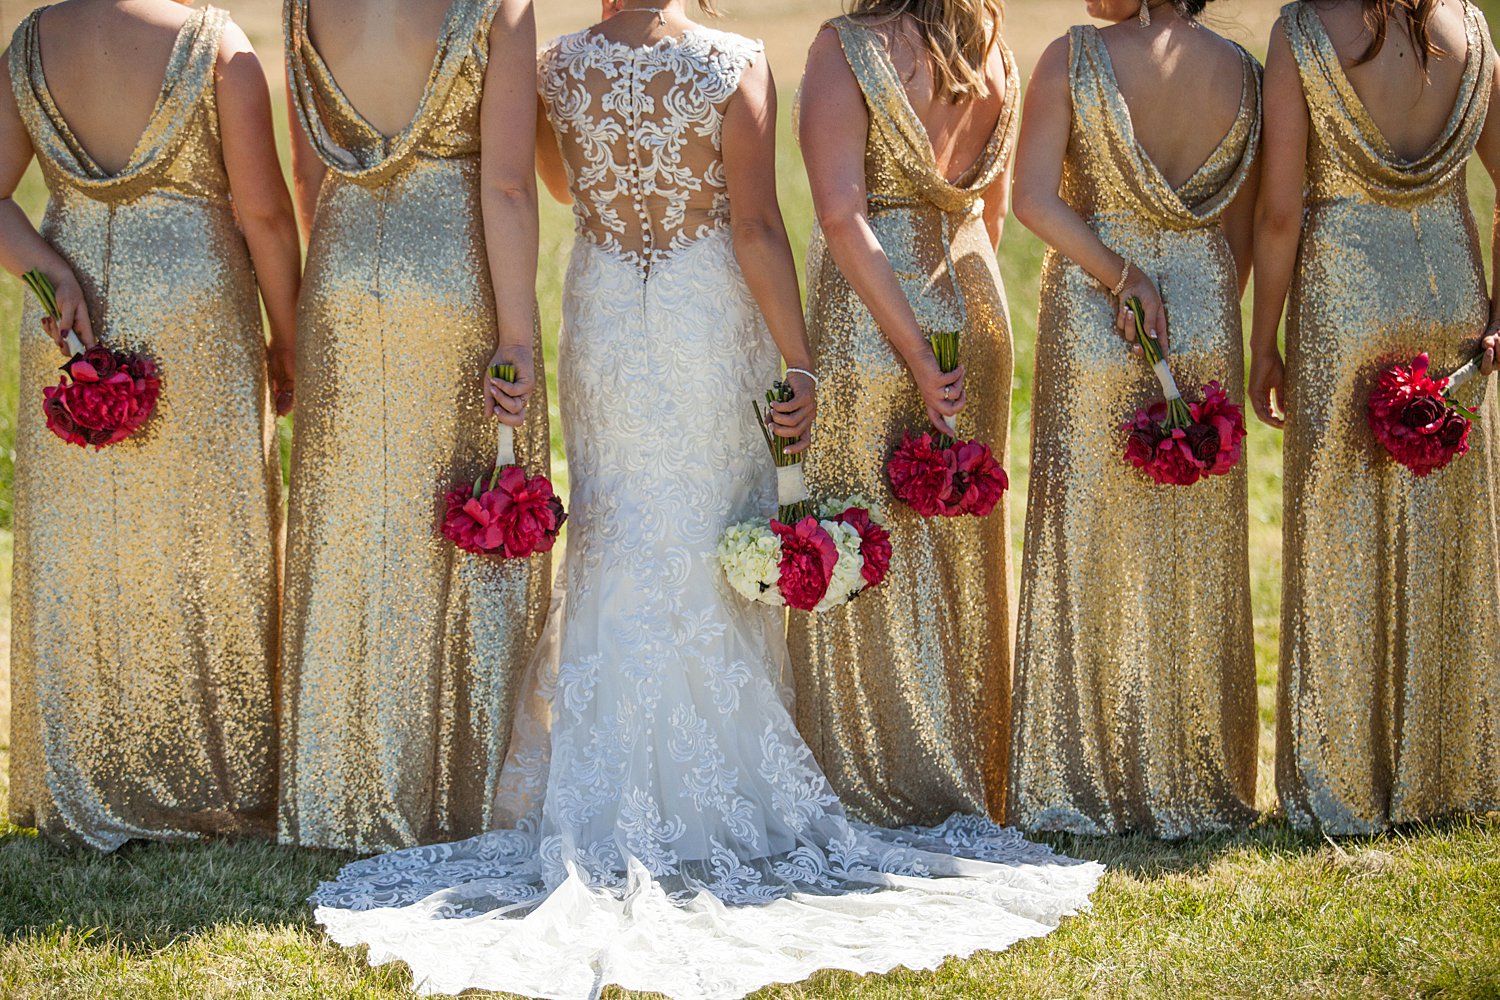 bridesmaids wearing gold sparkly gowns holding red bouquets